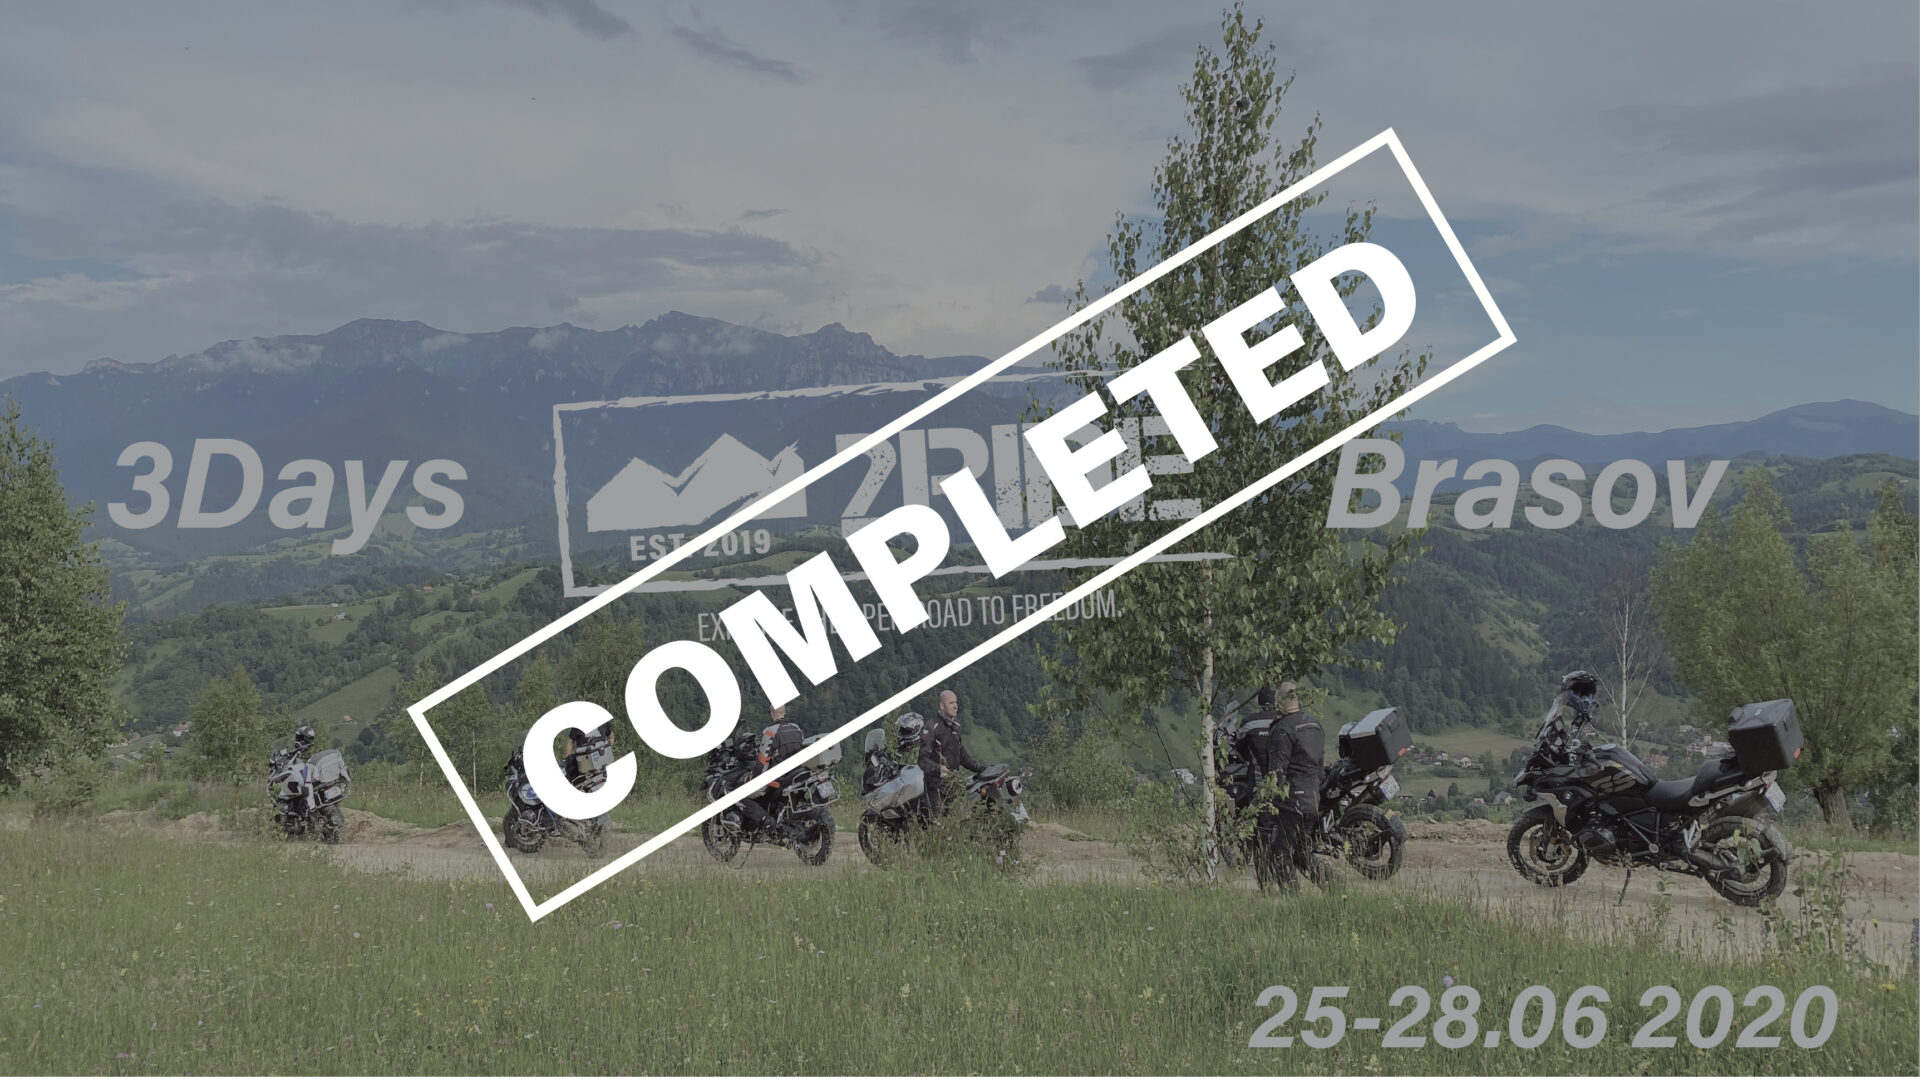 Offroad motorcycle tour in Brasov area